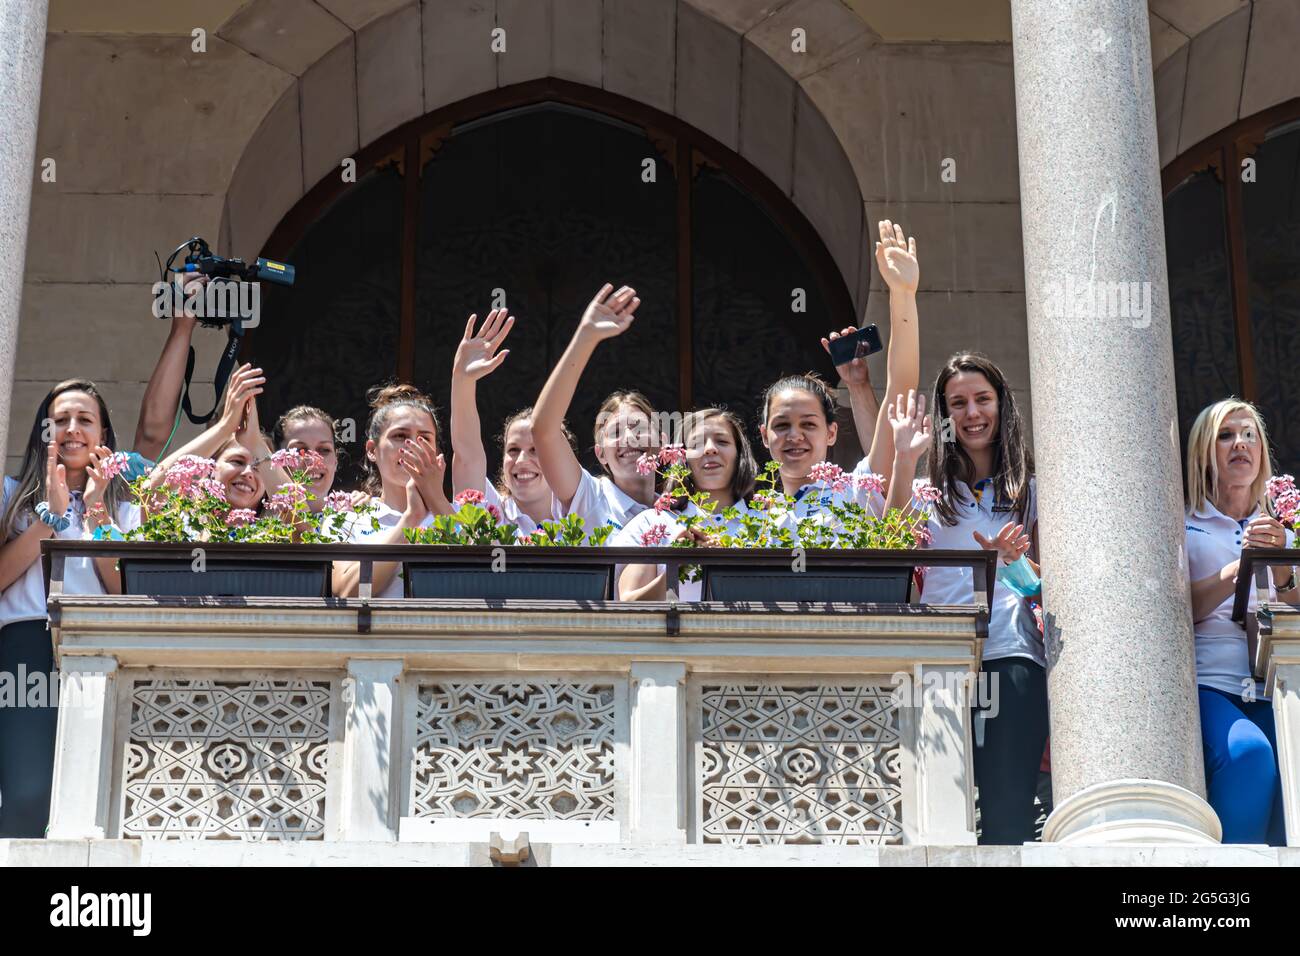 BH Women's Basketball team greets fans from the balcony of the City Hall Stock Photo